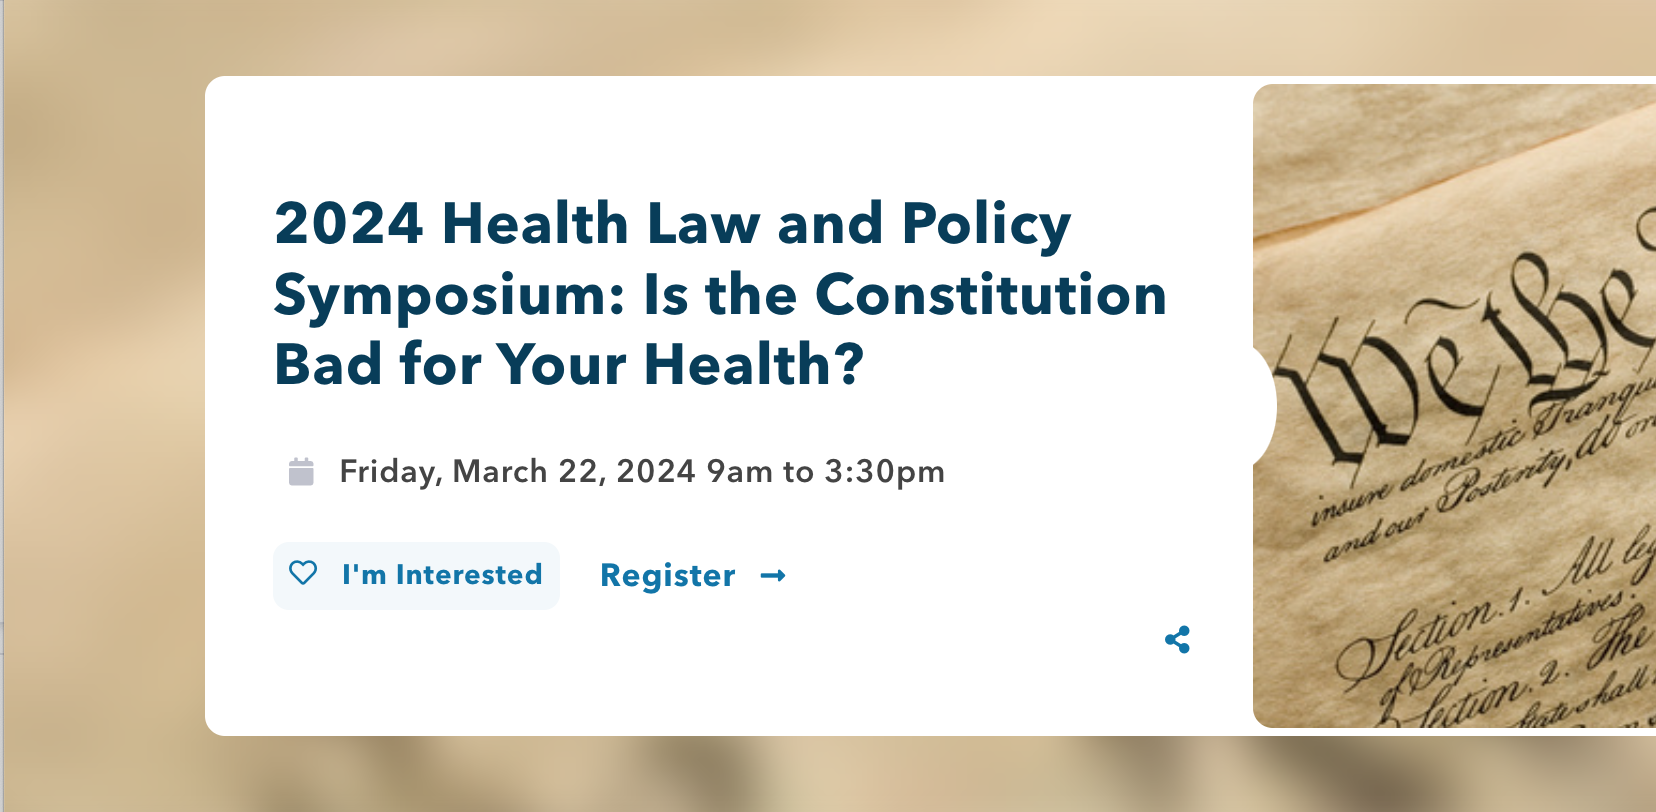 Screenshot of registration website for 2024 Health Law and Policy Symposium: Is the Constitution Bad for Your Health?